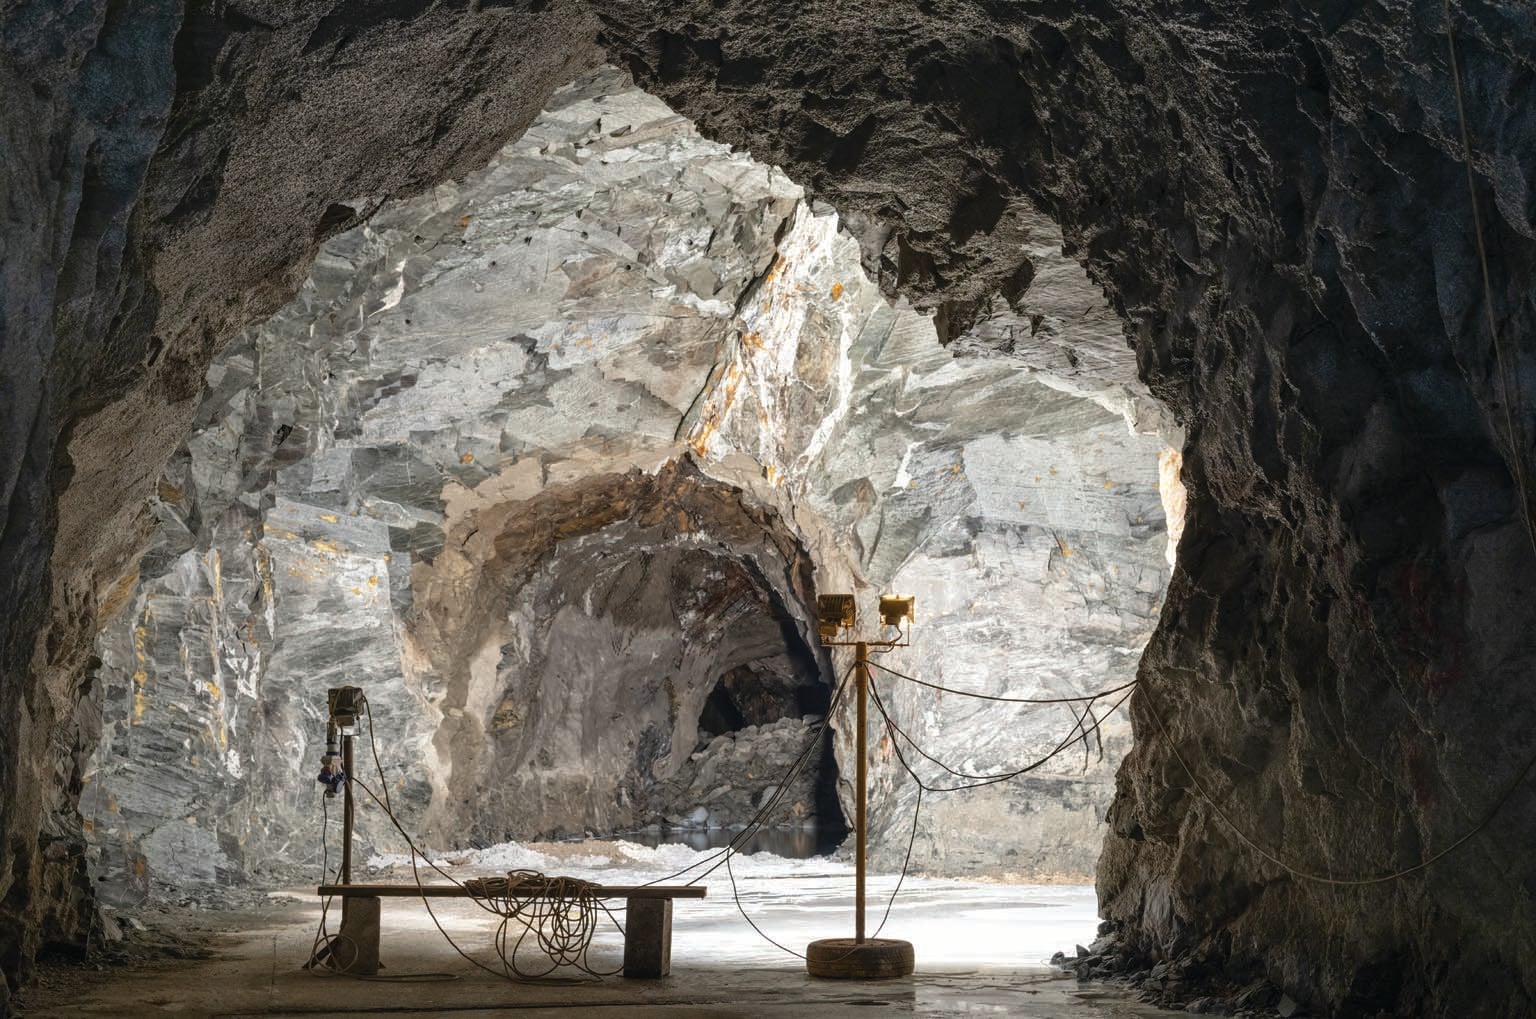 Wide view showing some equipment in a cave.